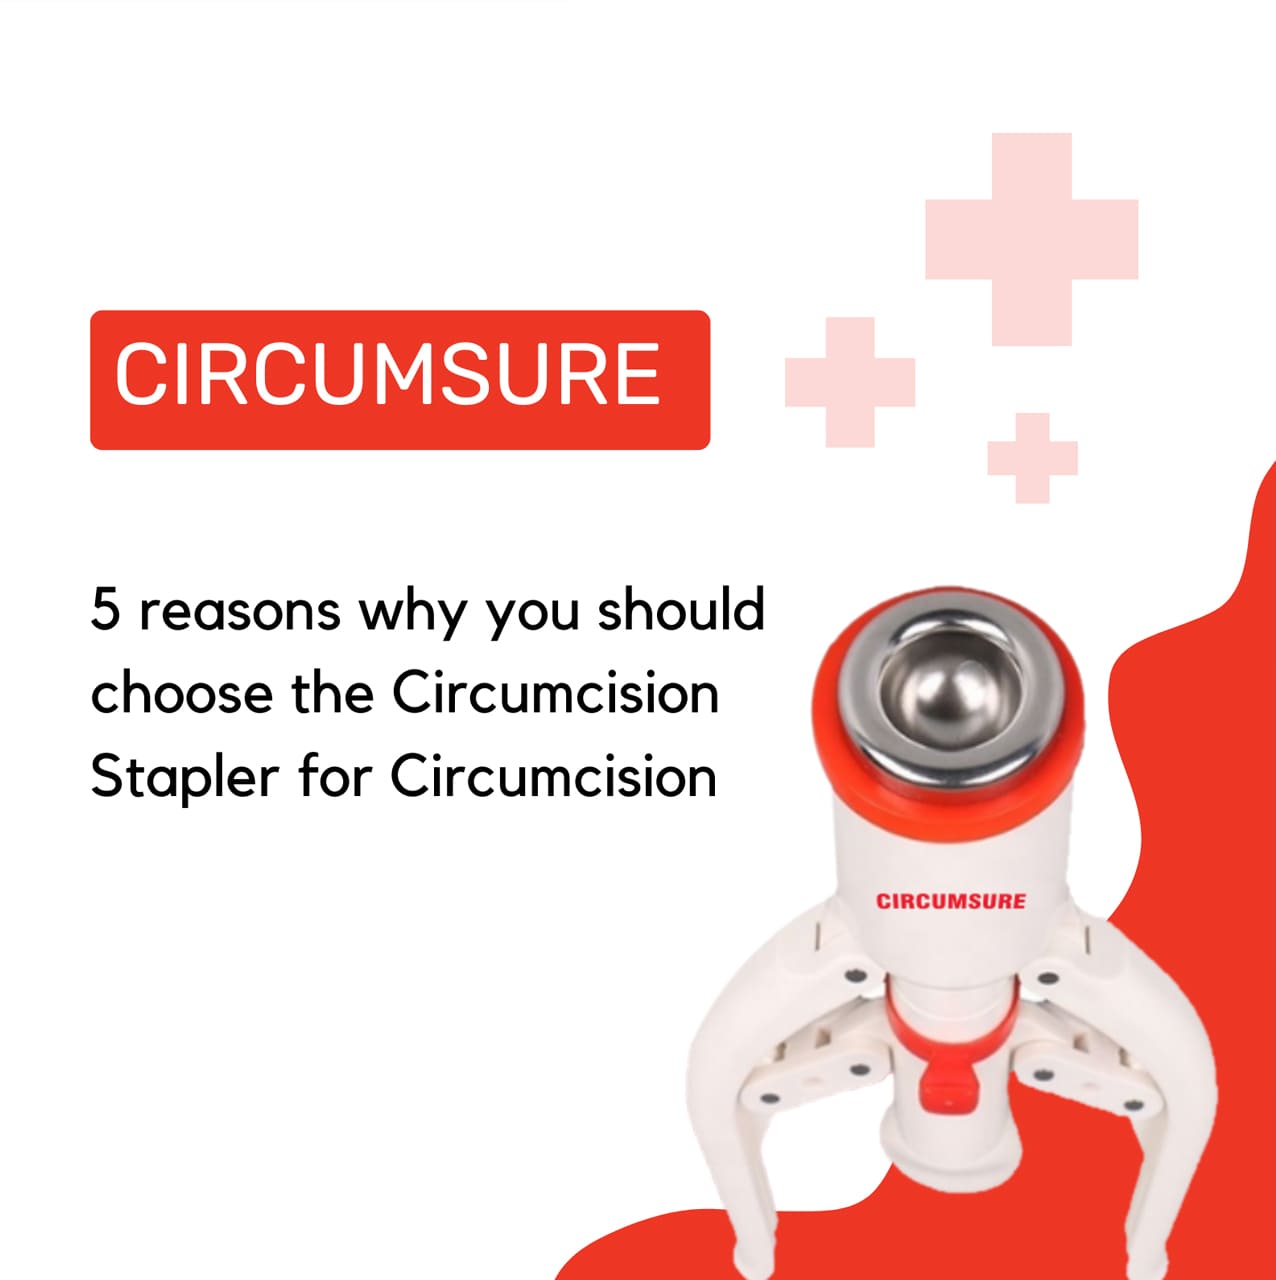  5 reasons why you should choose the Circumcision Stapler for Circumcision